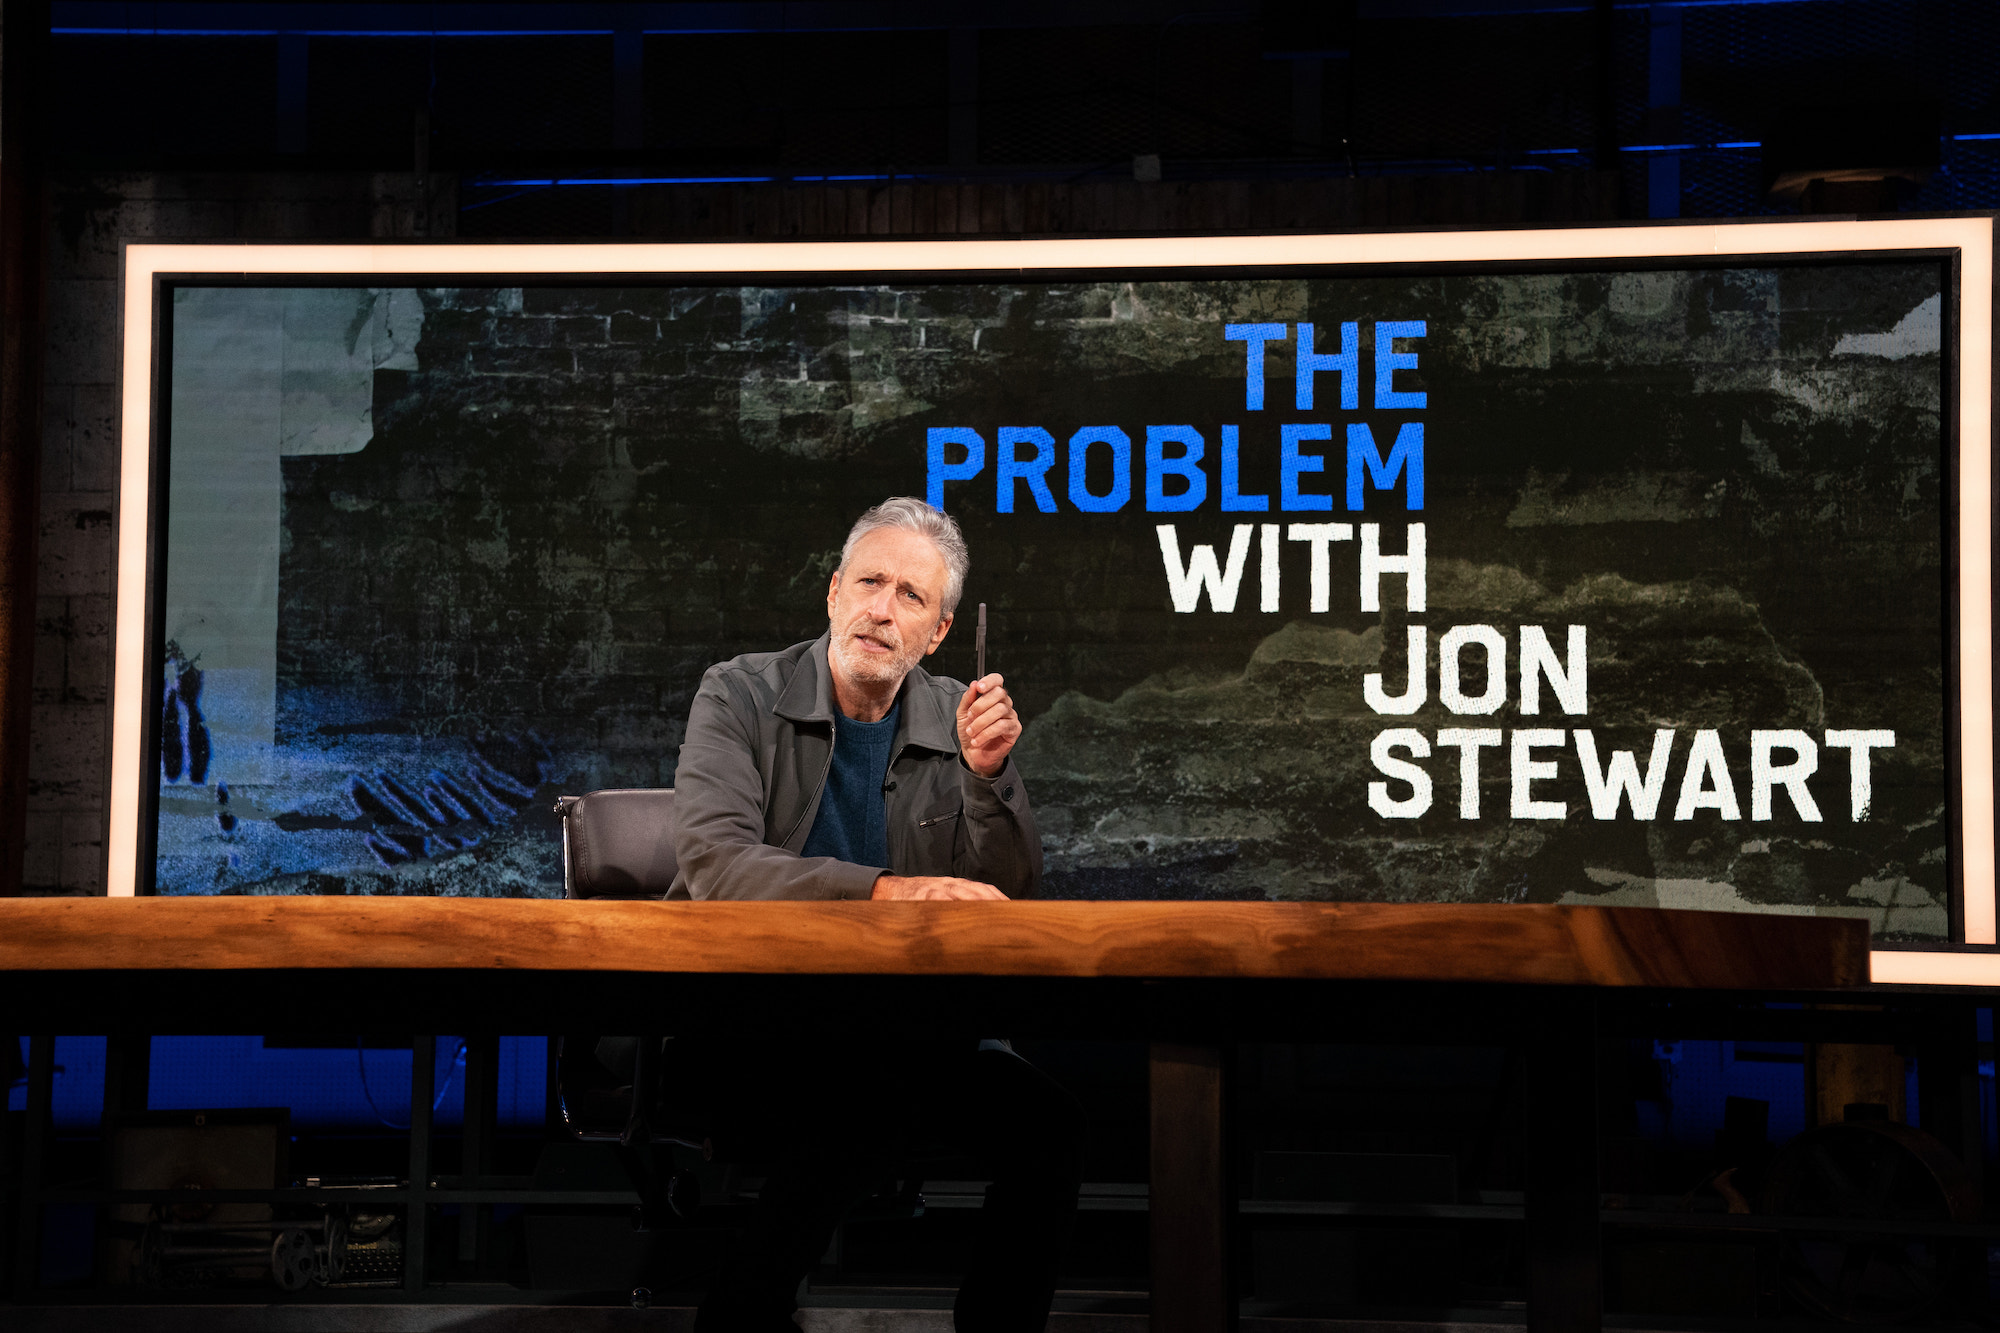 Photo 3 in 'The Problem with Jon Stewart' gallery showcasing lighting design by Mike Baldassari of Mike-O-Matic Industries LLC